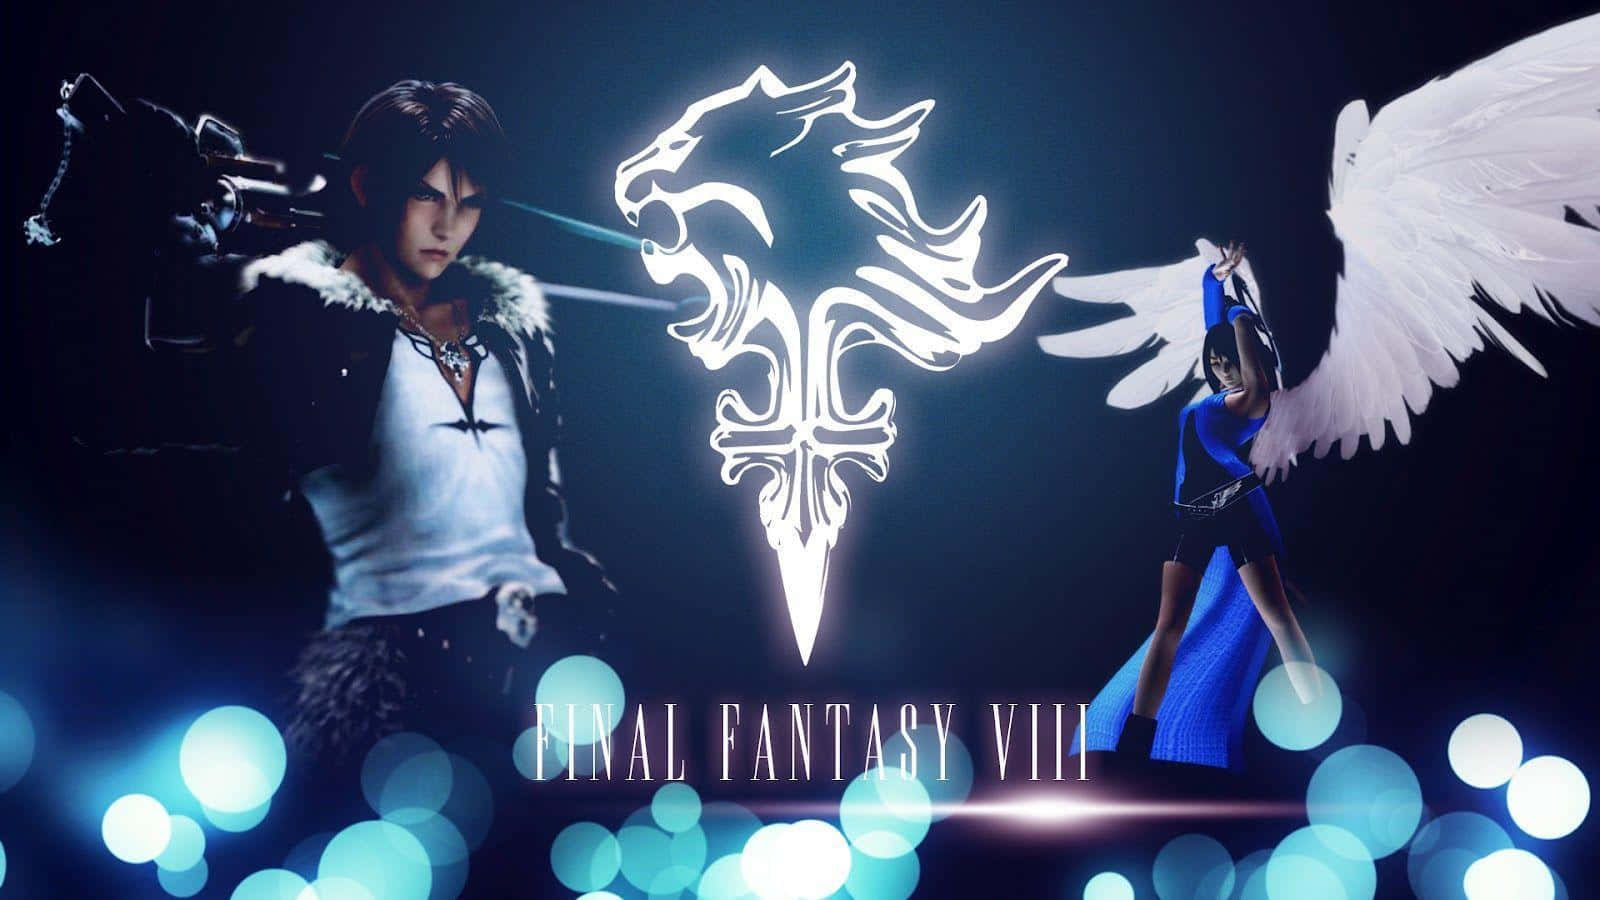 Protagonists From Final Fantasy Viii In Epic Battle Pose Wallpaper